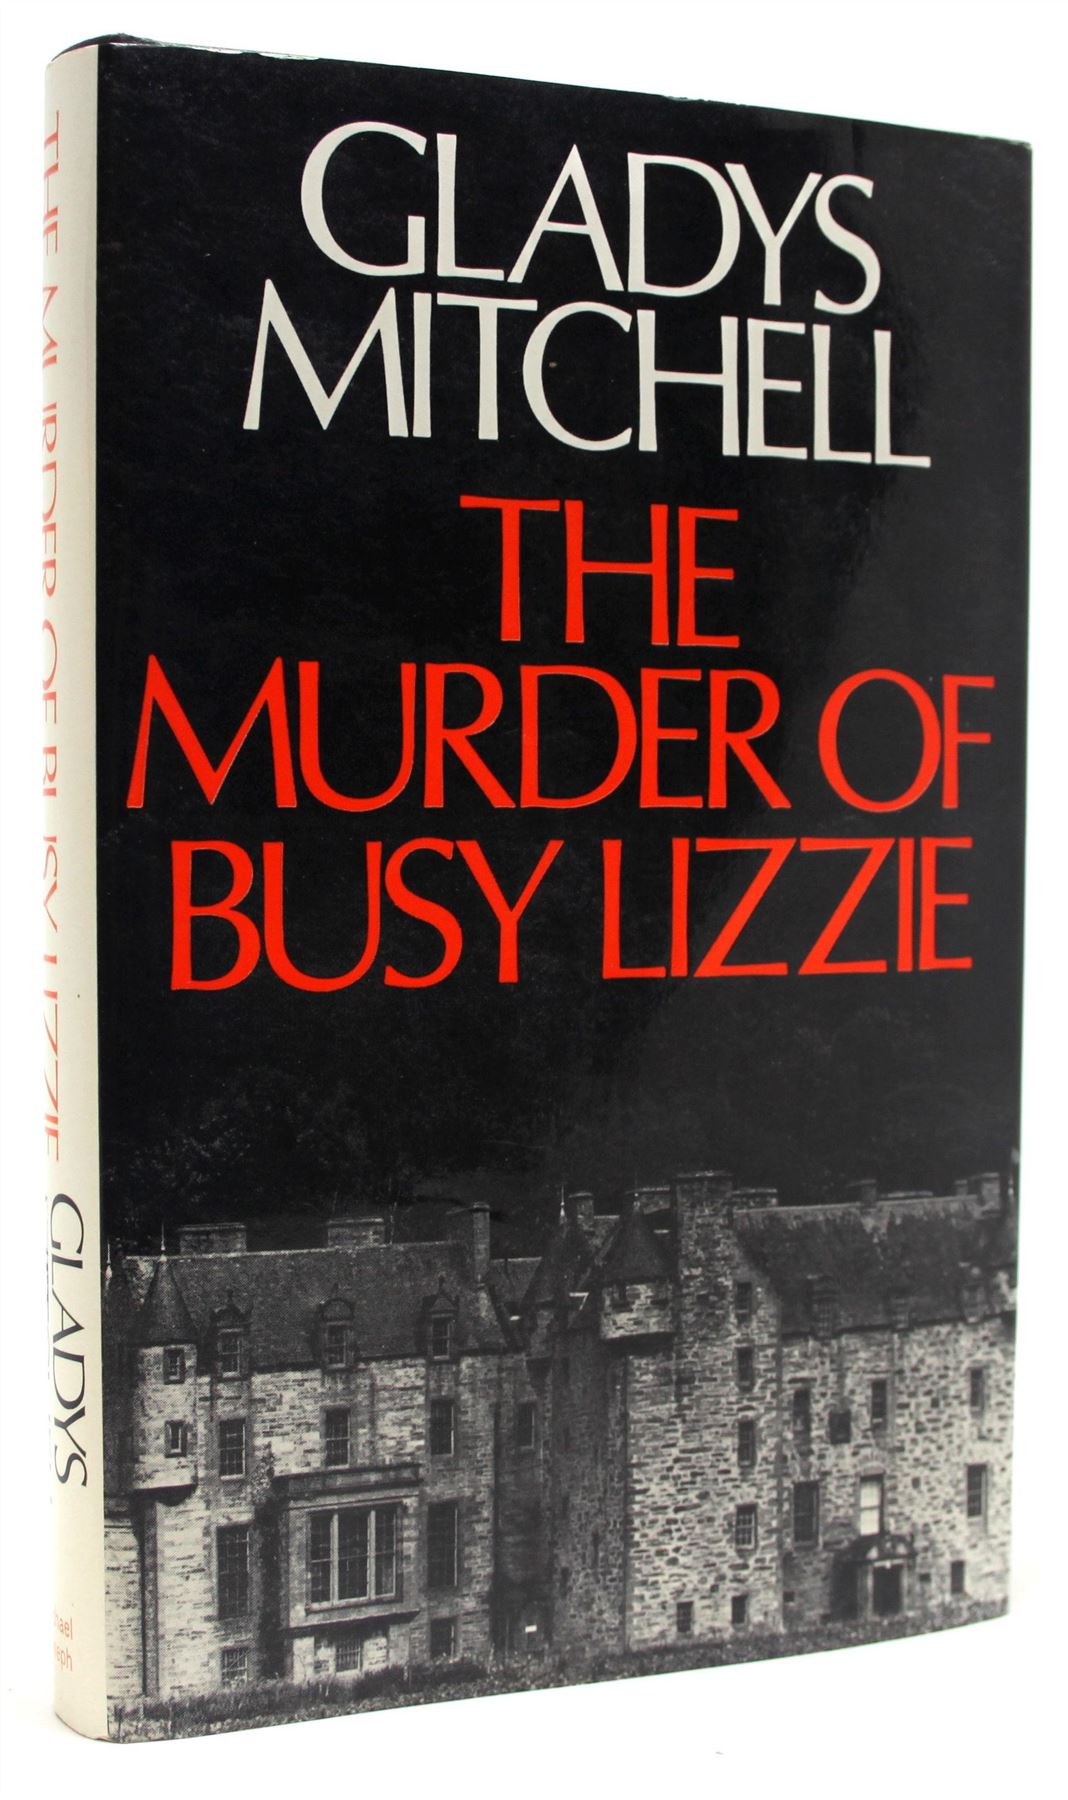 The Murder of Busy Lizzie